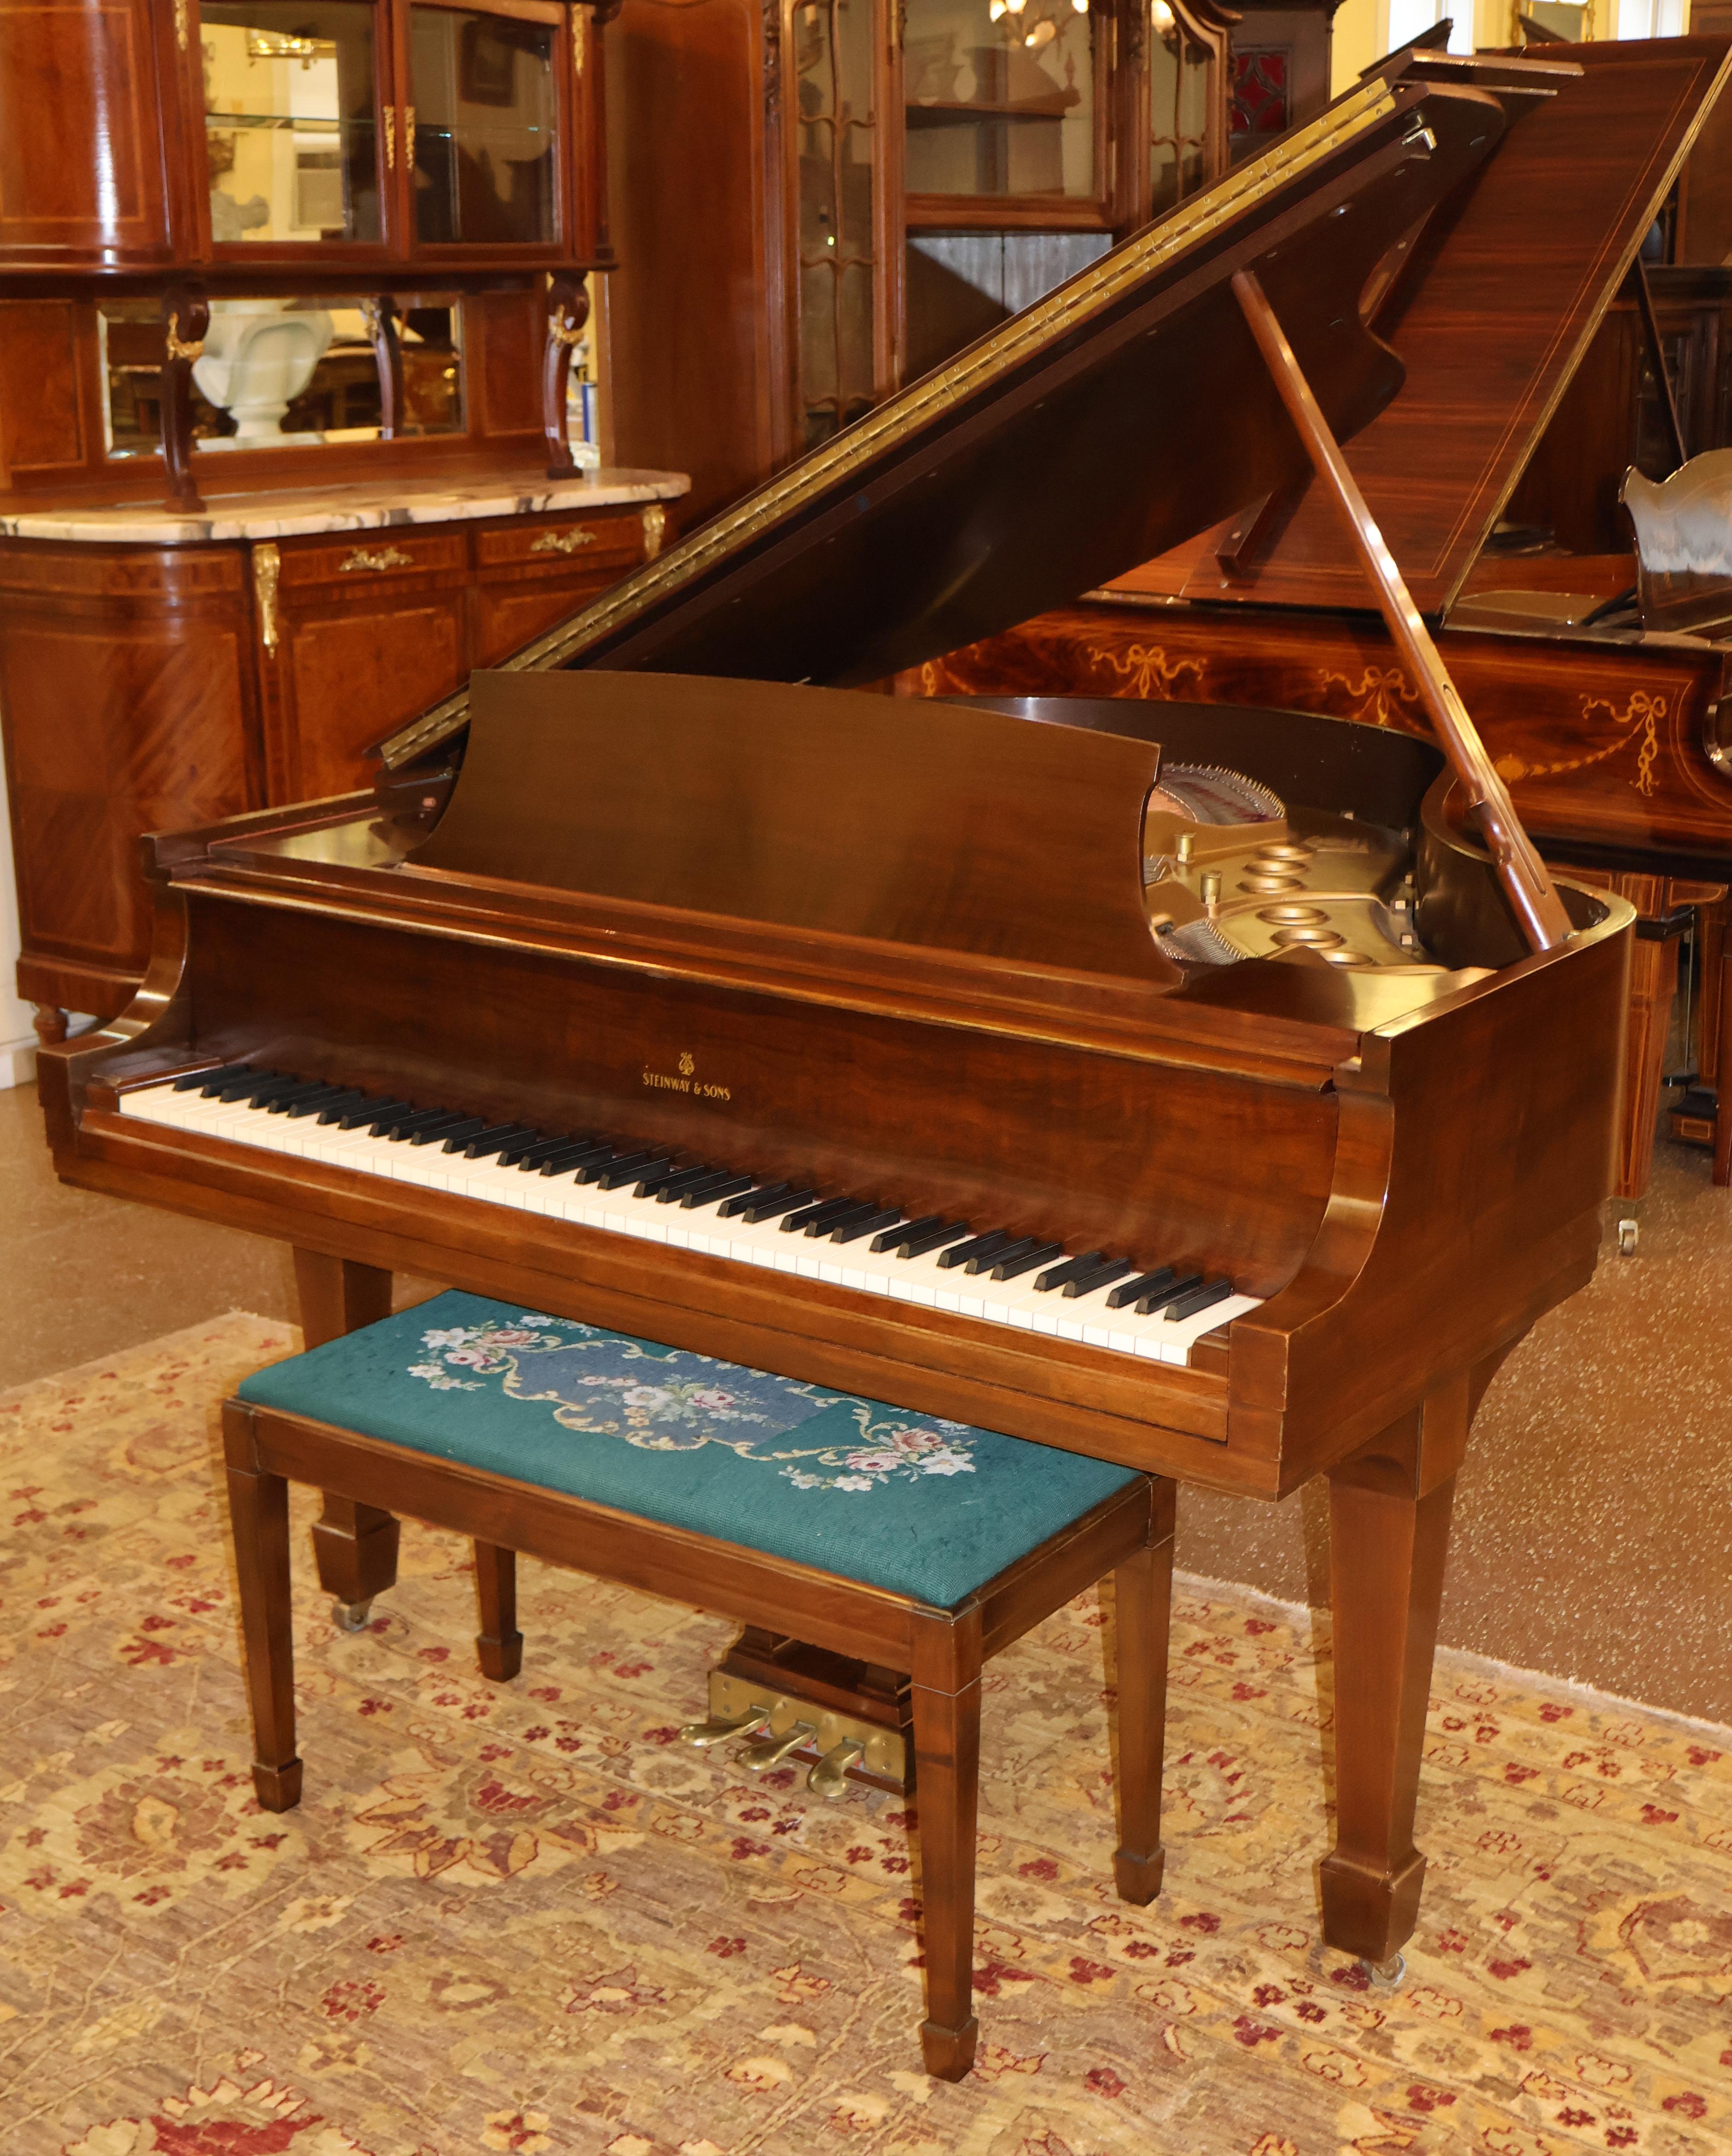 This Steinway was made in 1951 and is in very clean! The soundboard is in excellent shape and the piano has a nice sound to it! The case is also in very good vintage condition! The keys are ivory and the bench has needle point fabric.